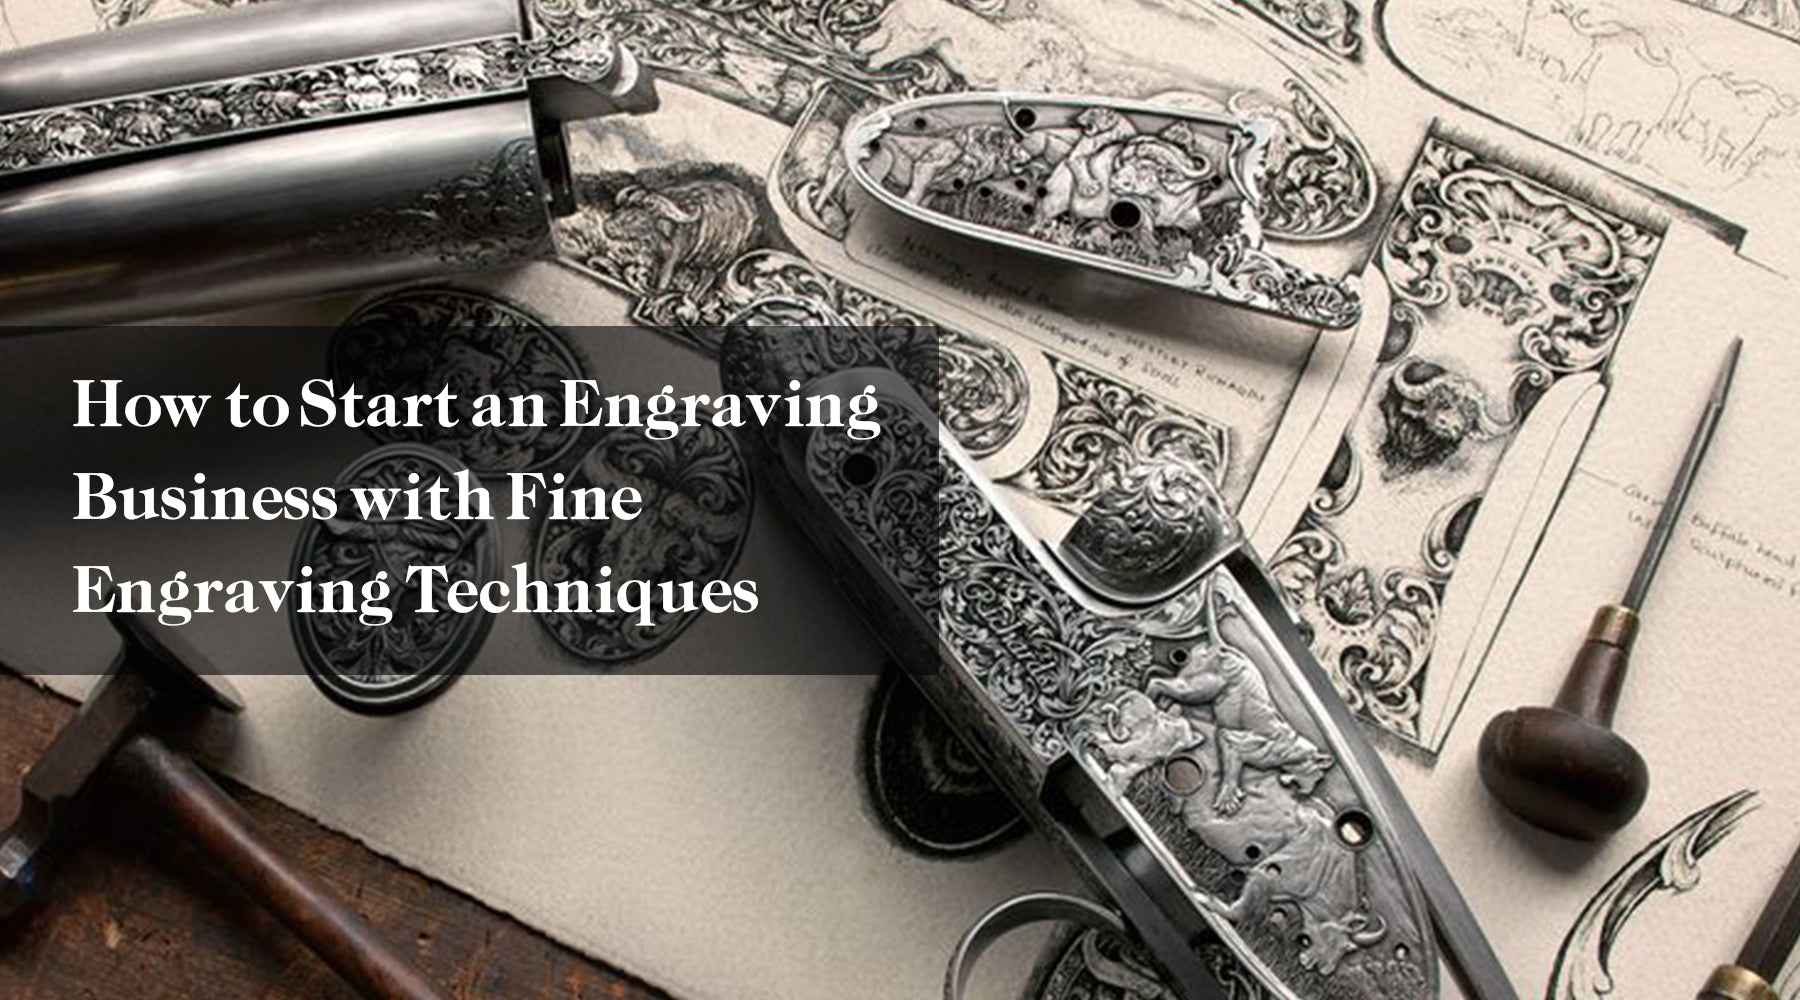 How to Start an Engraving Business with Fine Engraving Techniques